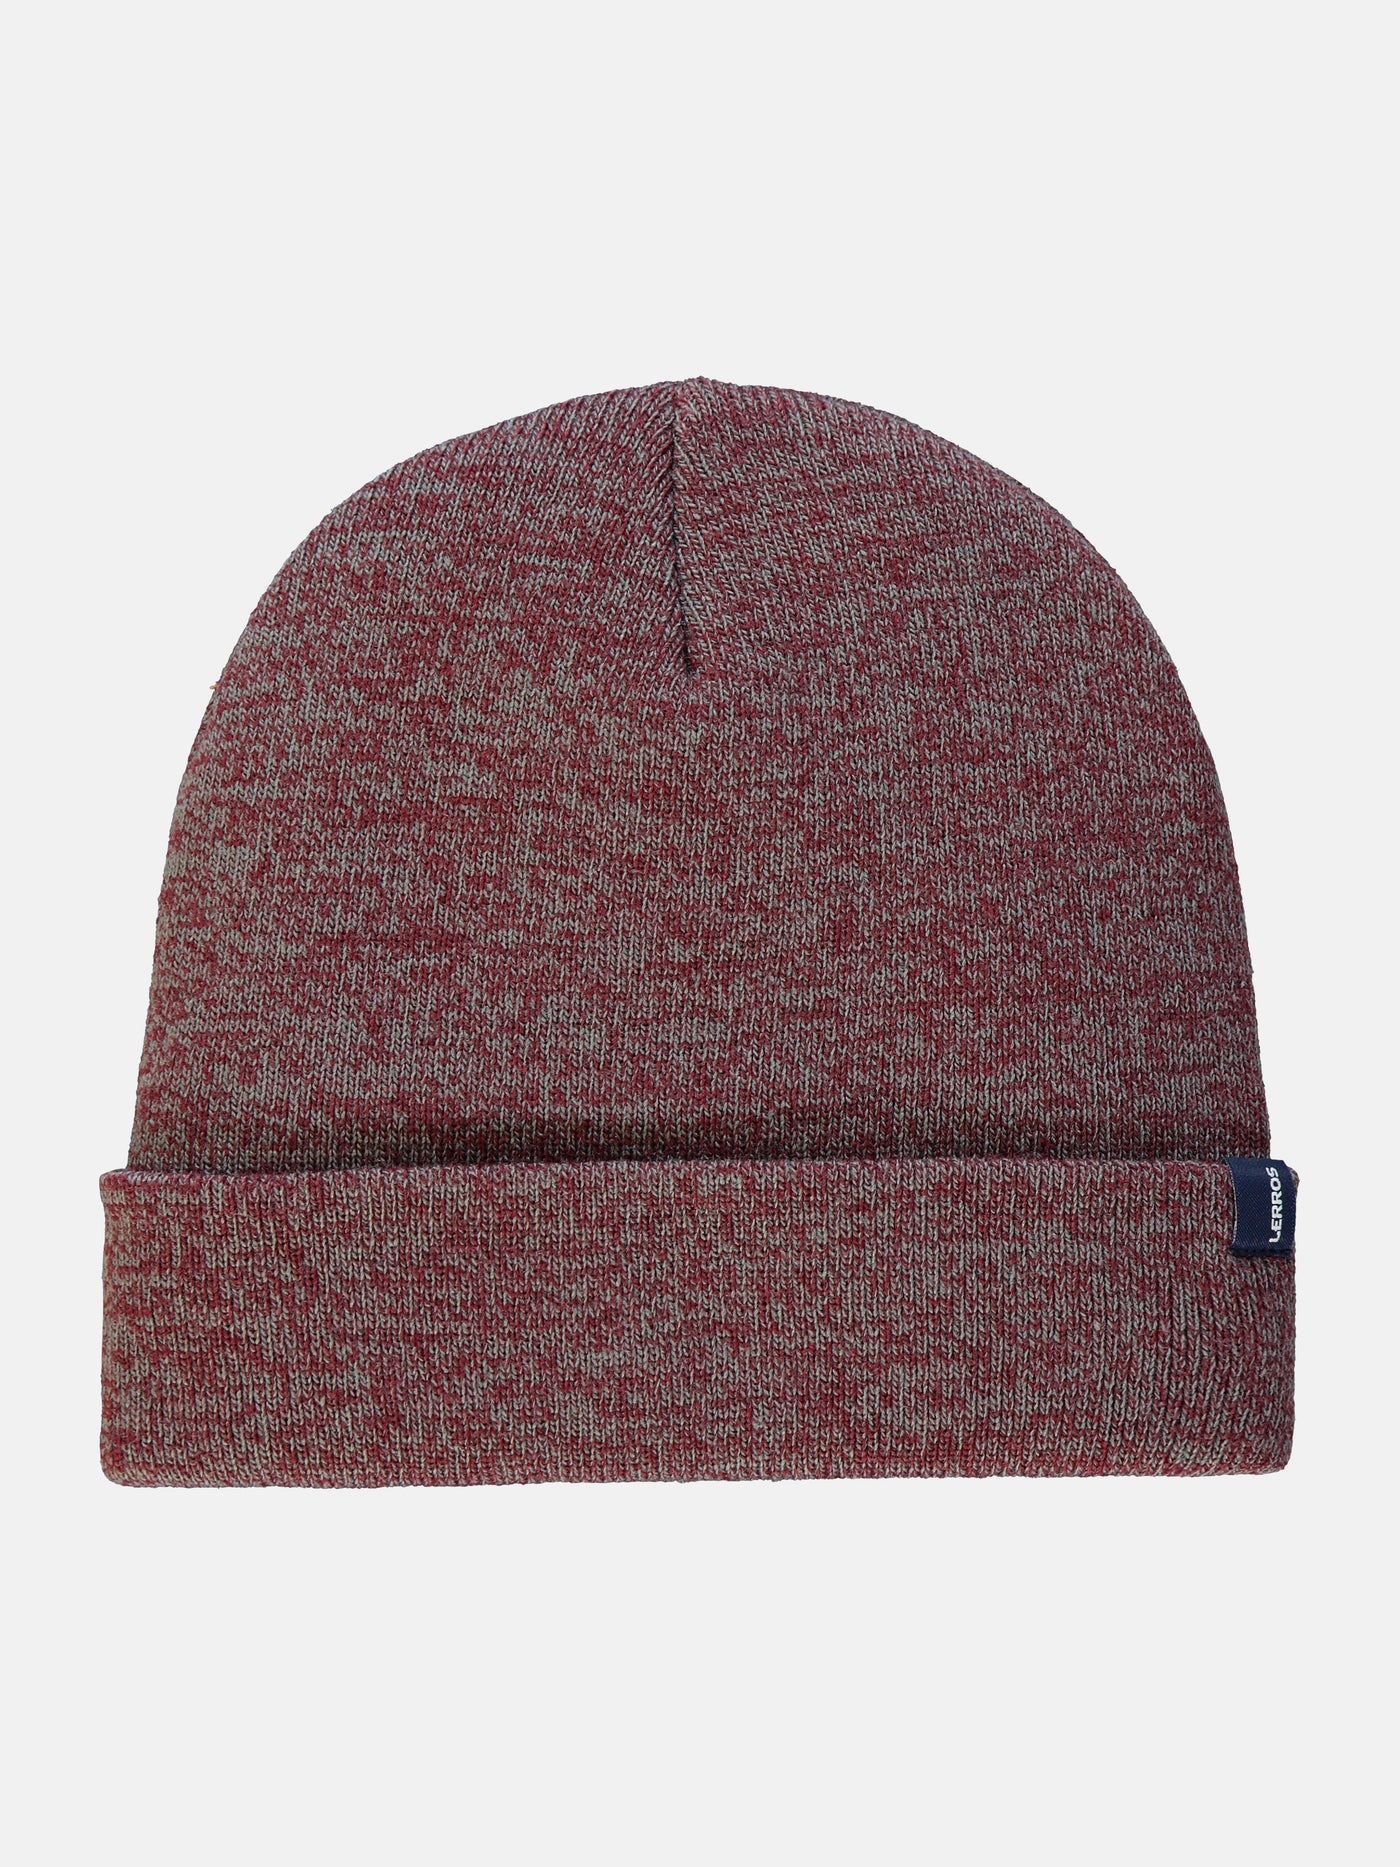 Knitted hat, flat knit